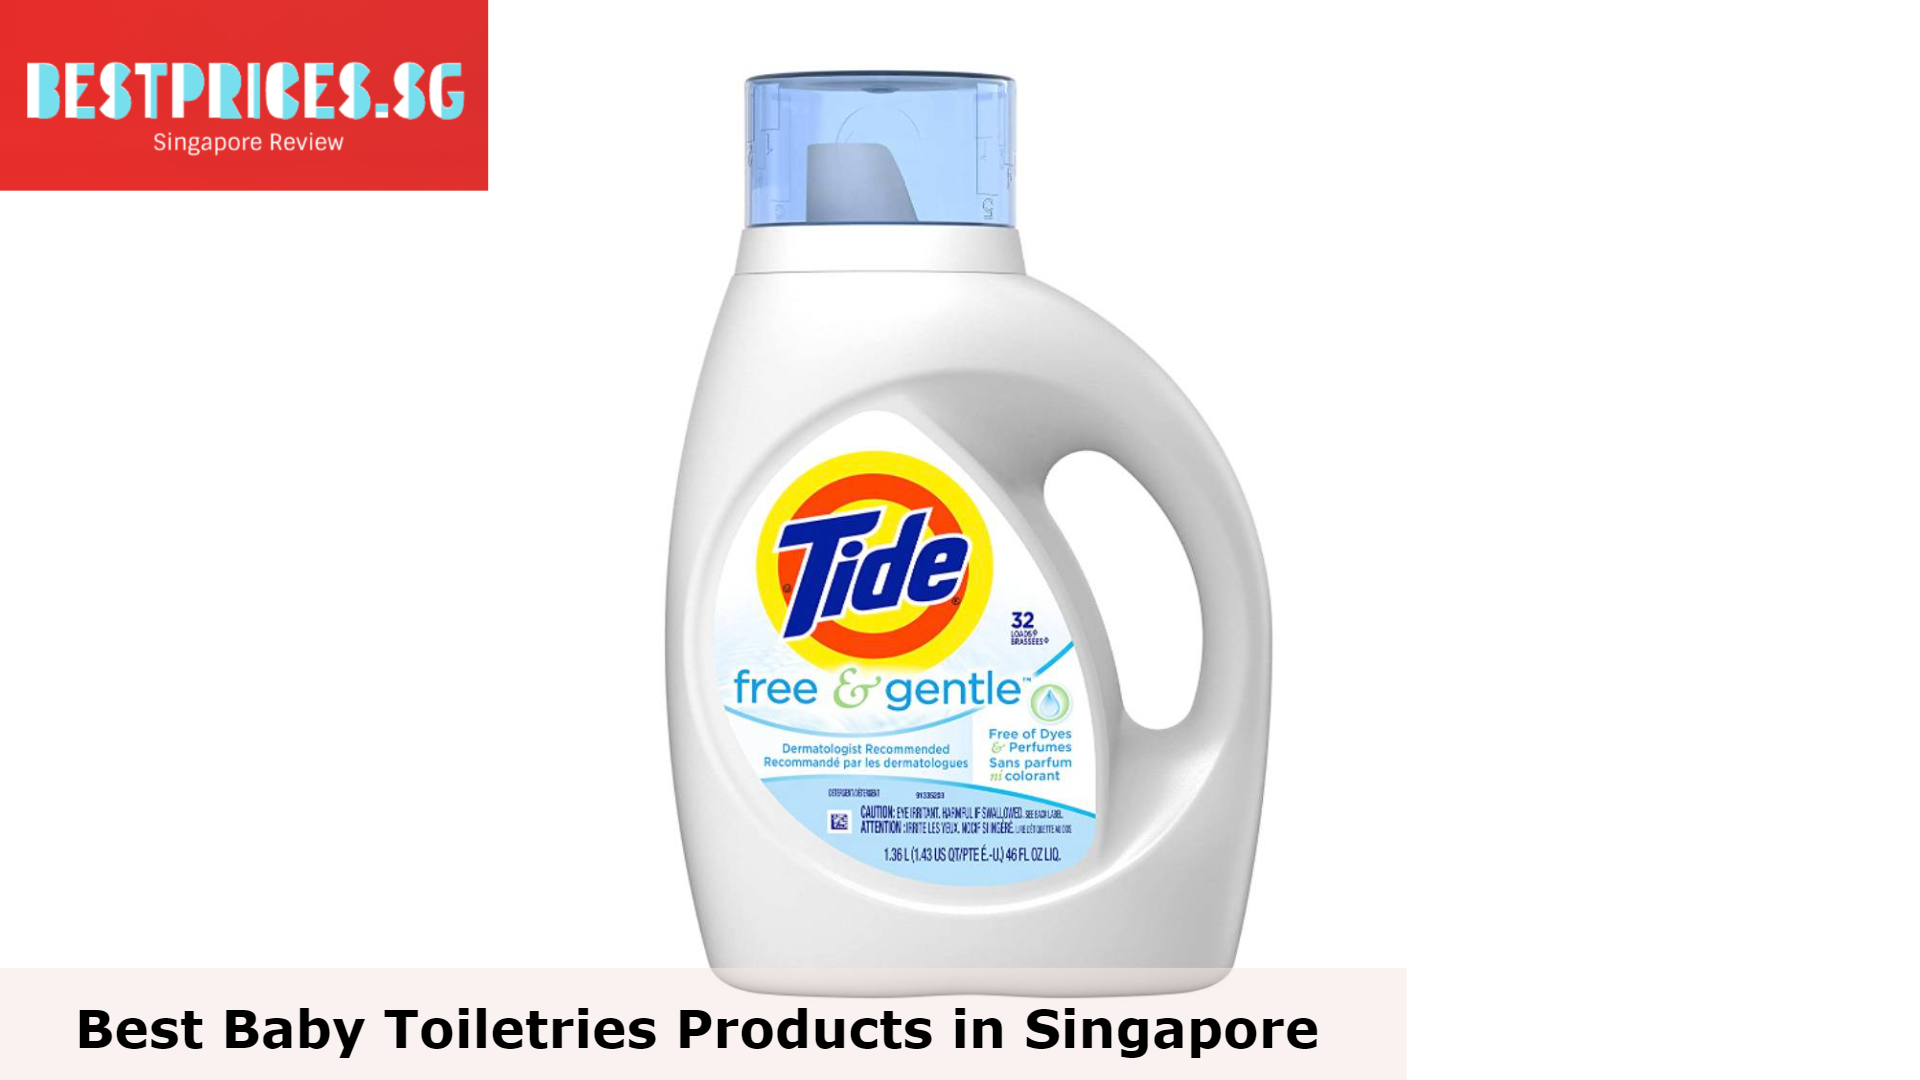 Tide Free and Gentle - Best Baby Toiletries Products in Singapore, Baby Toiletries Products Singapore, What toiletries do you need for newborns?, List of Essential Baby Toiletries in Singapore, What are baby toiletries?, What Toiletries do babies need?, Which is the best baby bath products in Singapore?, baby toiletries kit Singapore, baby toiletries cost, baby toiletries cost for a year, baby products Singapore, baby toiletries bag, newborn baby products, items in a baby shop, What products do you need for a newborn baby in Singapore?, baby products online singapore, Where to buy cheap Baby stuff in Singapore,